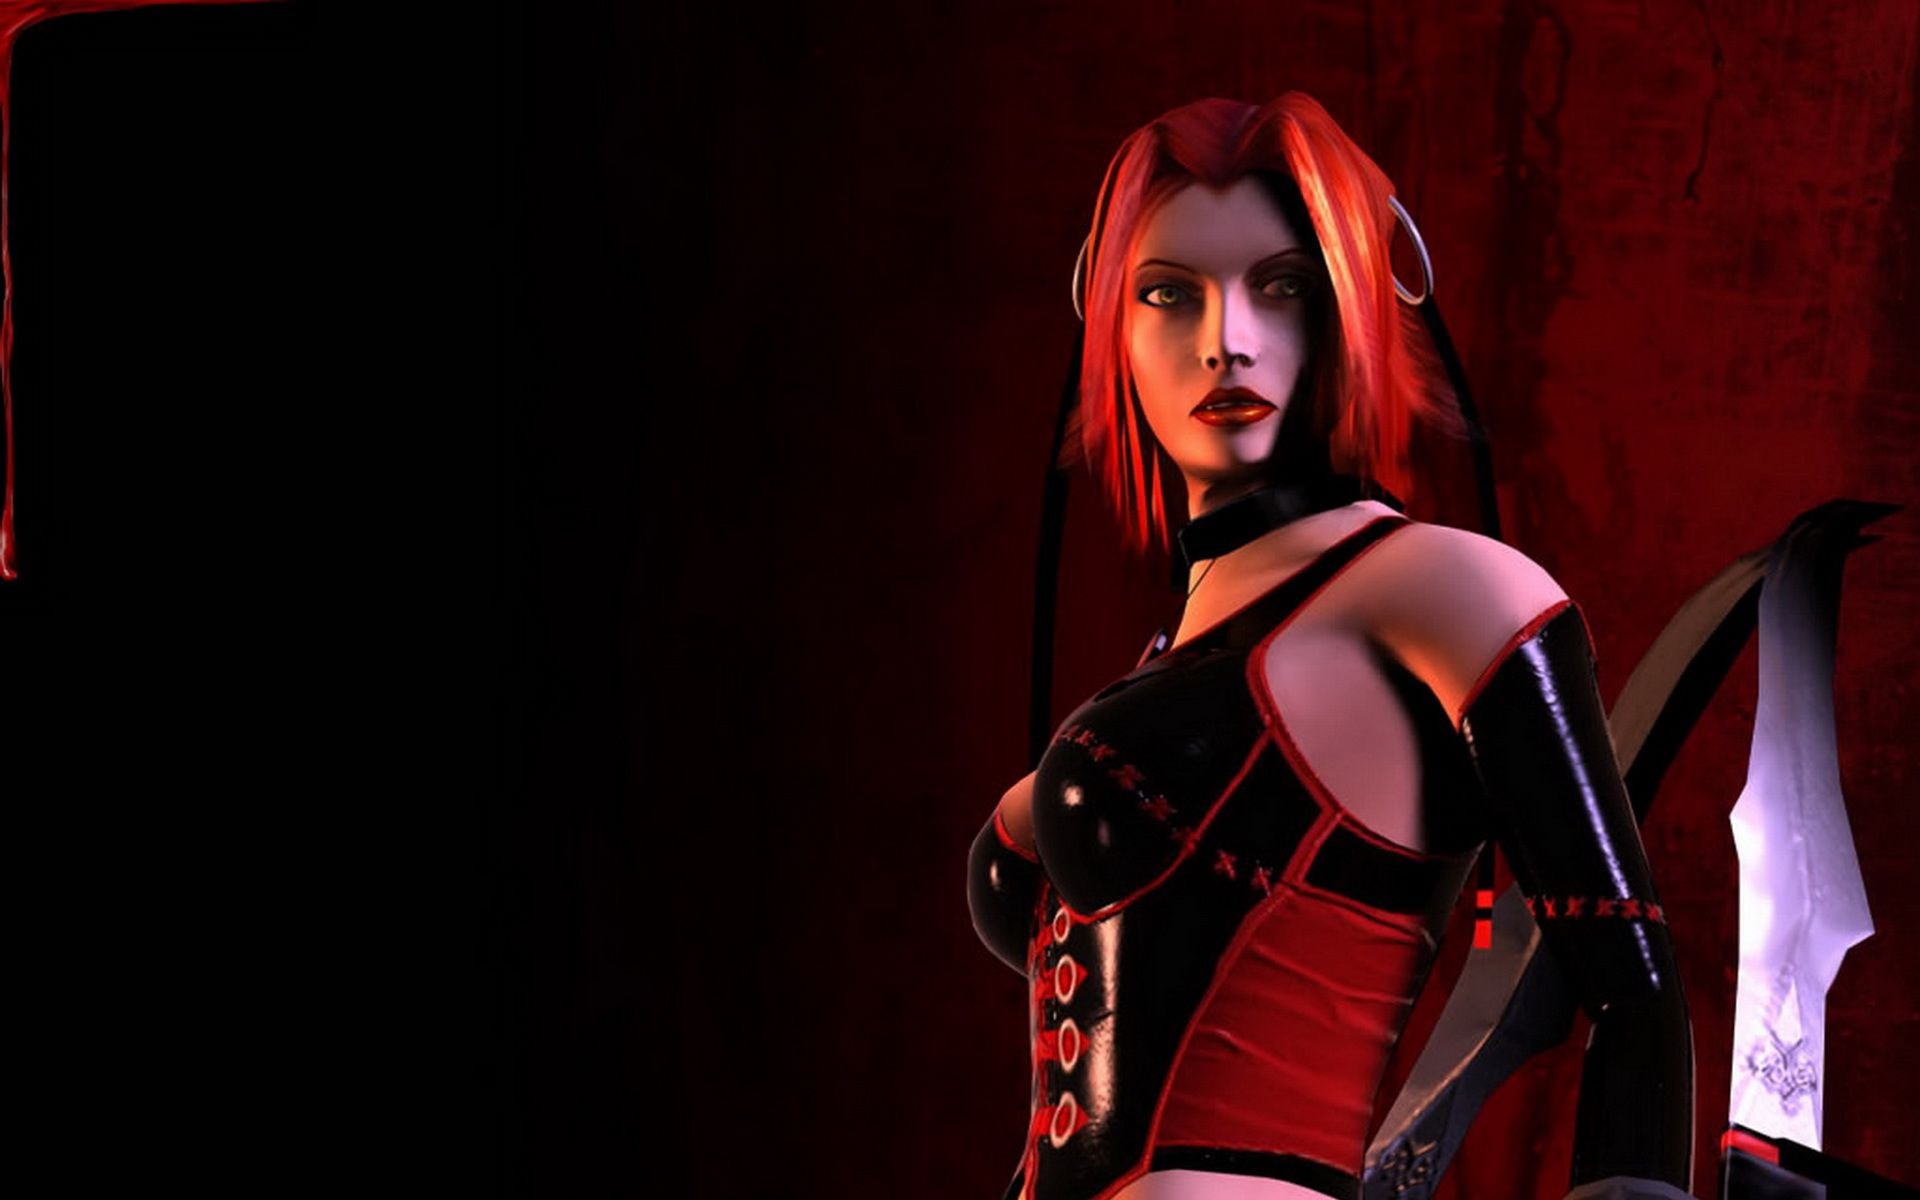 Bloodrayne HD Wallpaper And Background Image